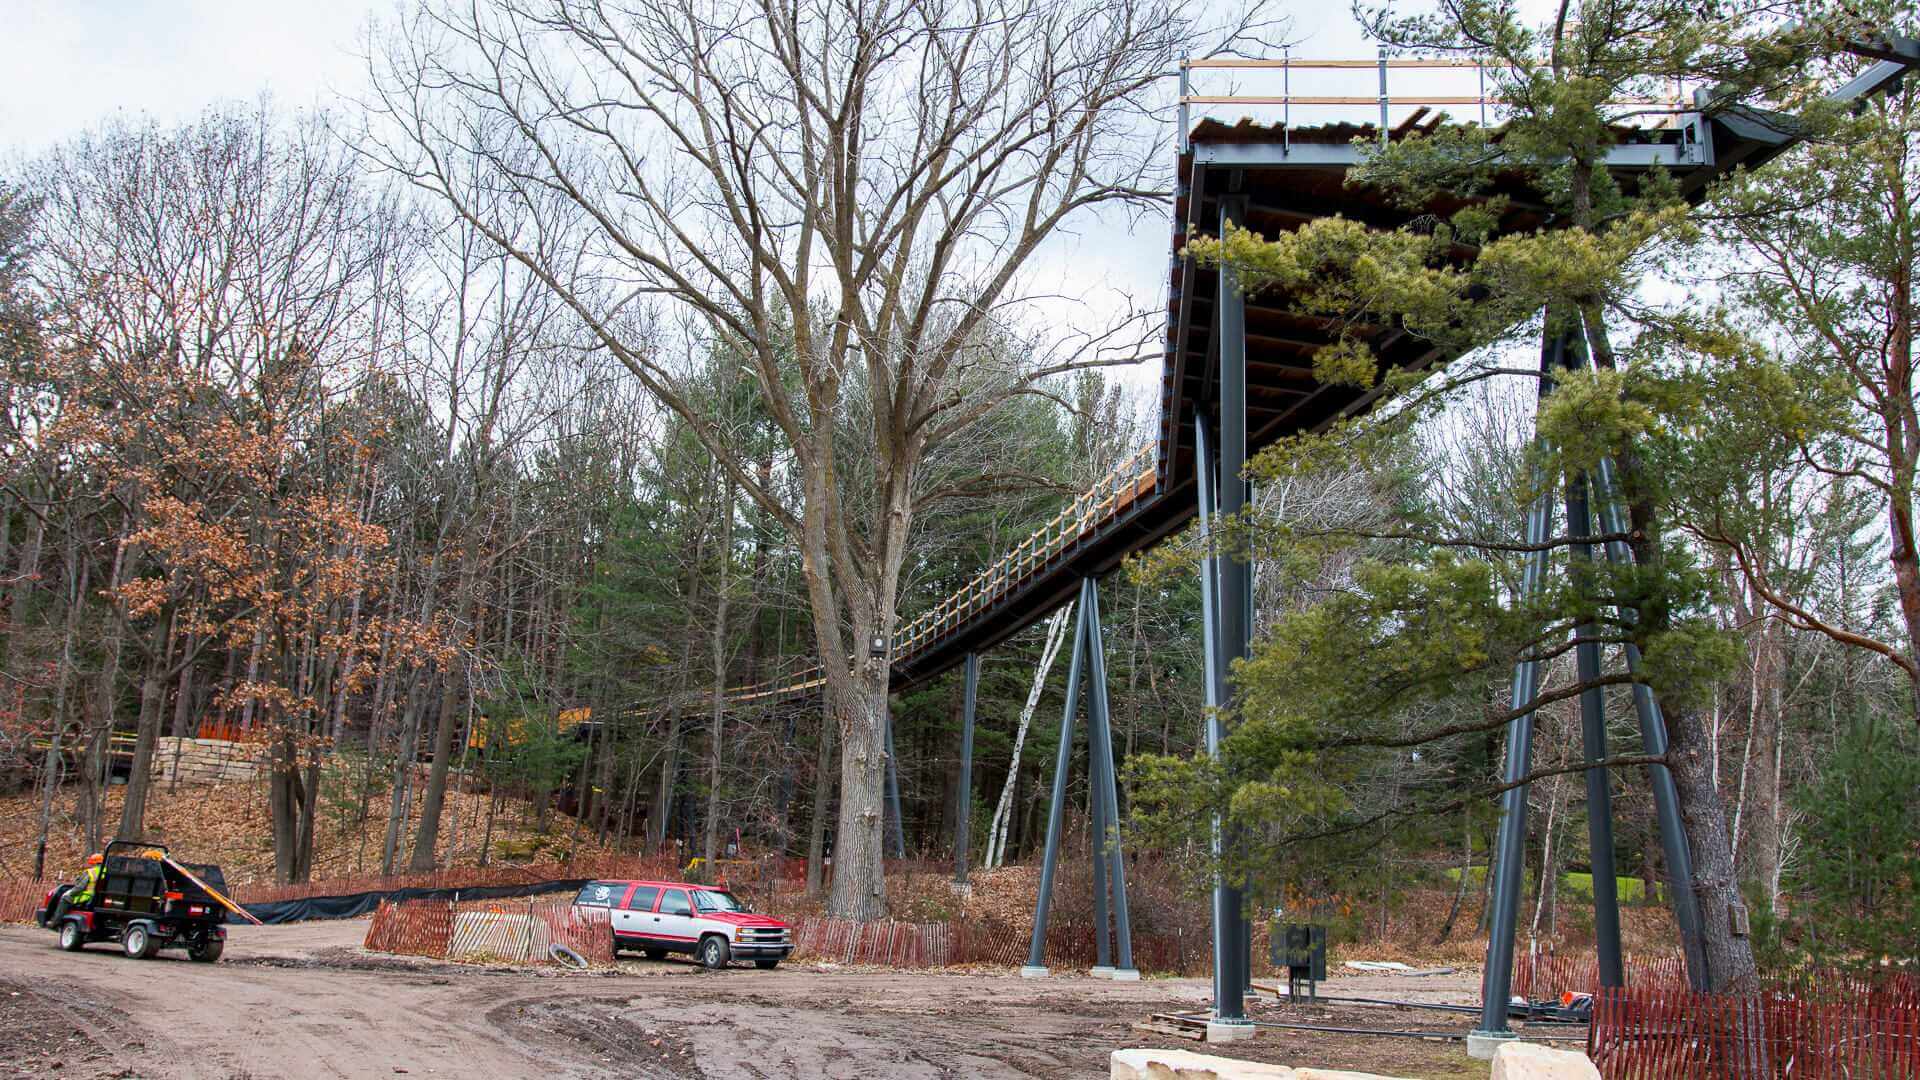 A bridge with cars parked below and trees all around